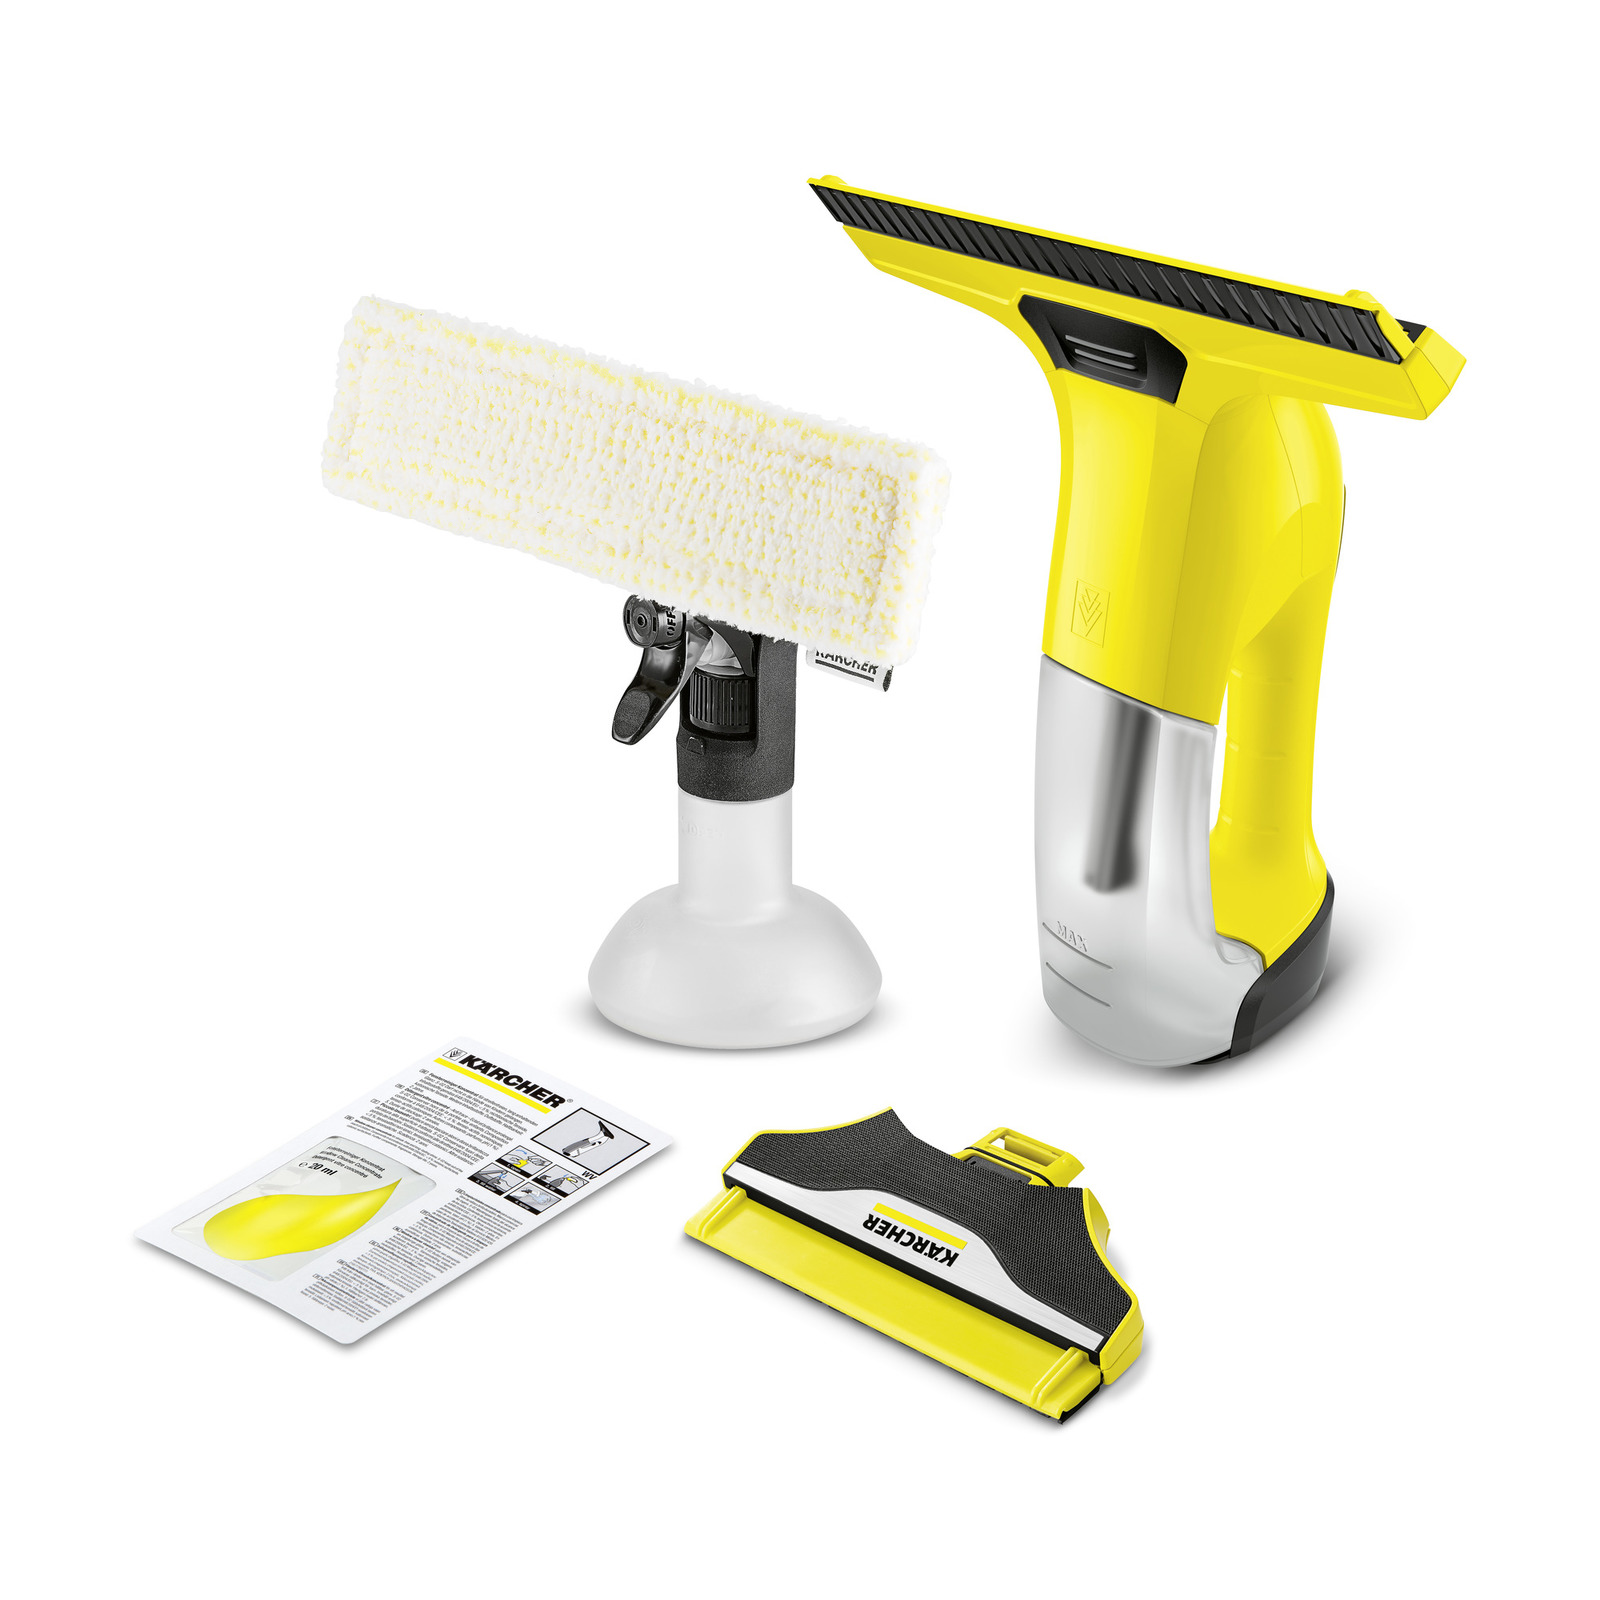 Smoby Kärcher Window Washer WV6 with light and sound - Toy window cleaner